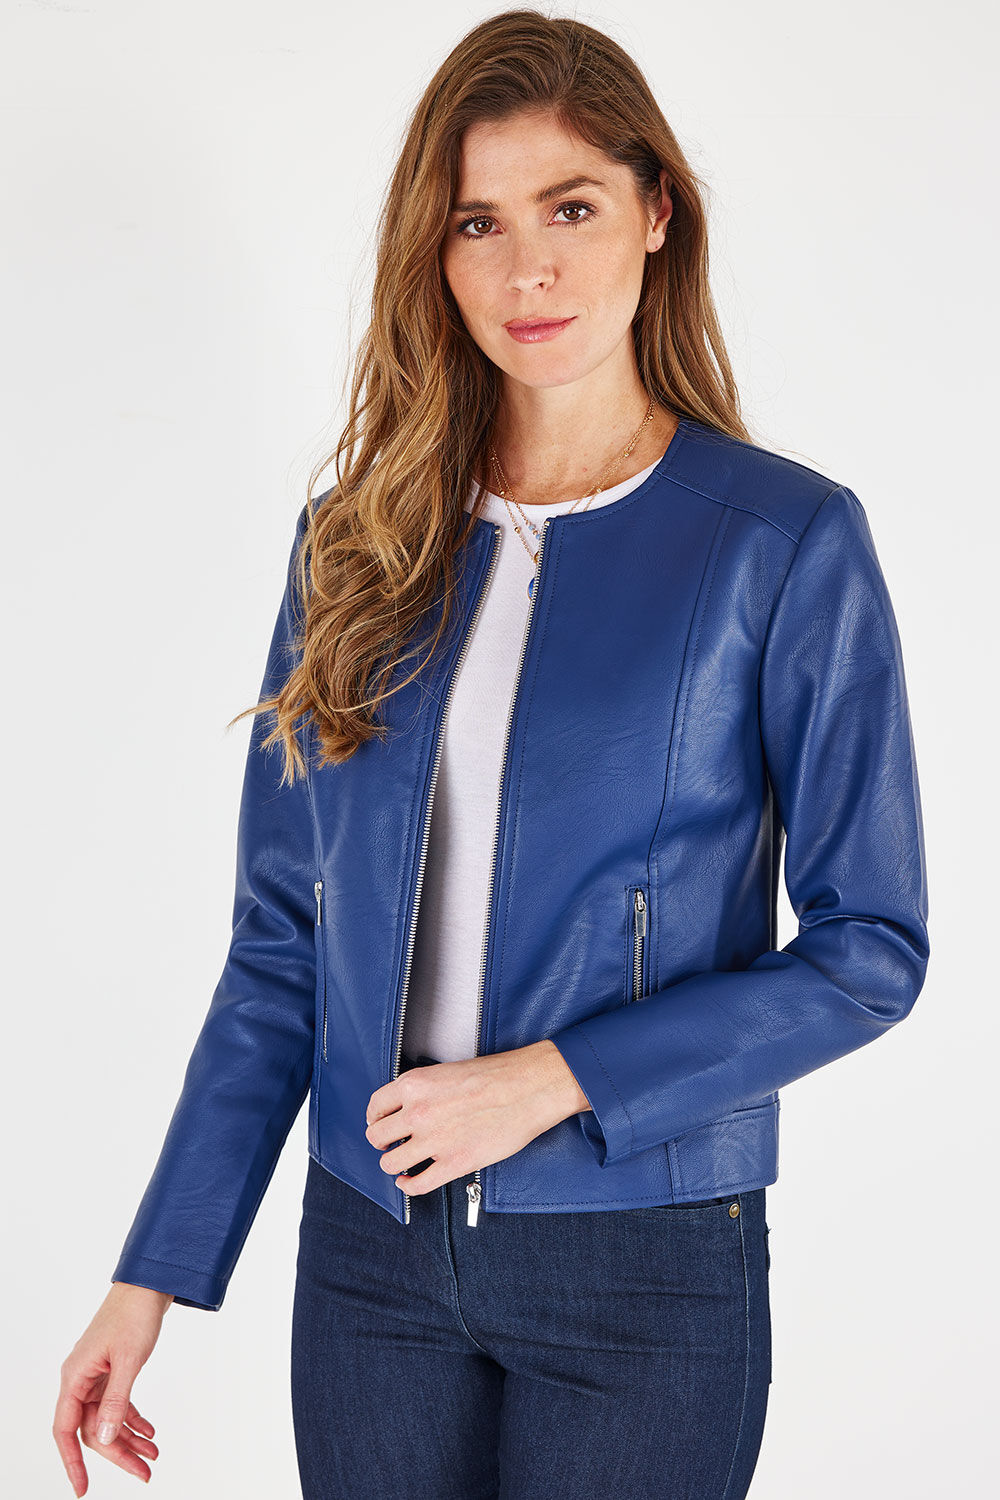 Bonmarche Navy Faux Leather Collarless Jacket, Size: 20